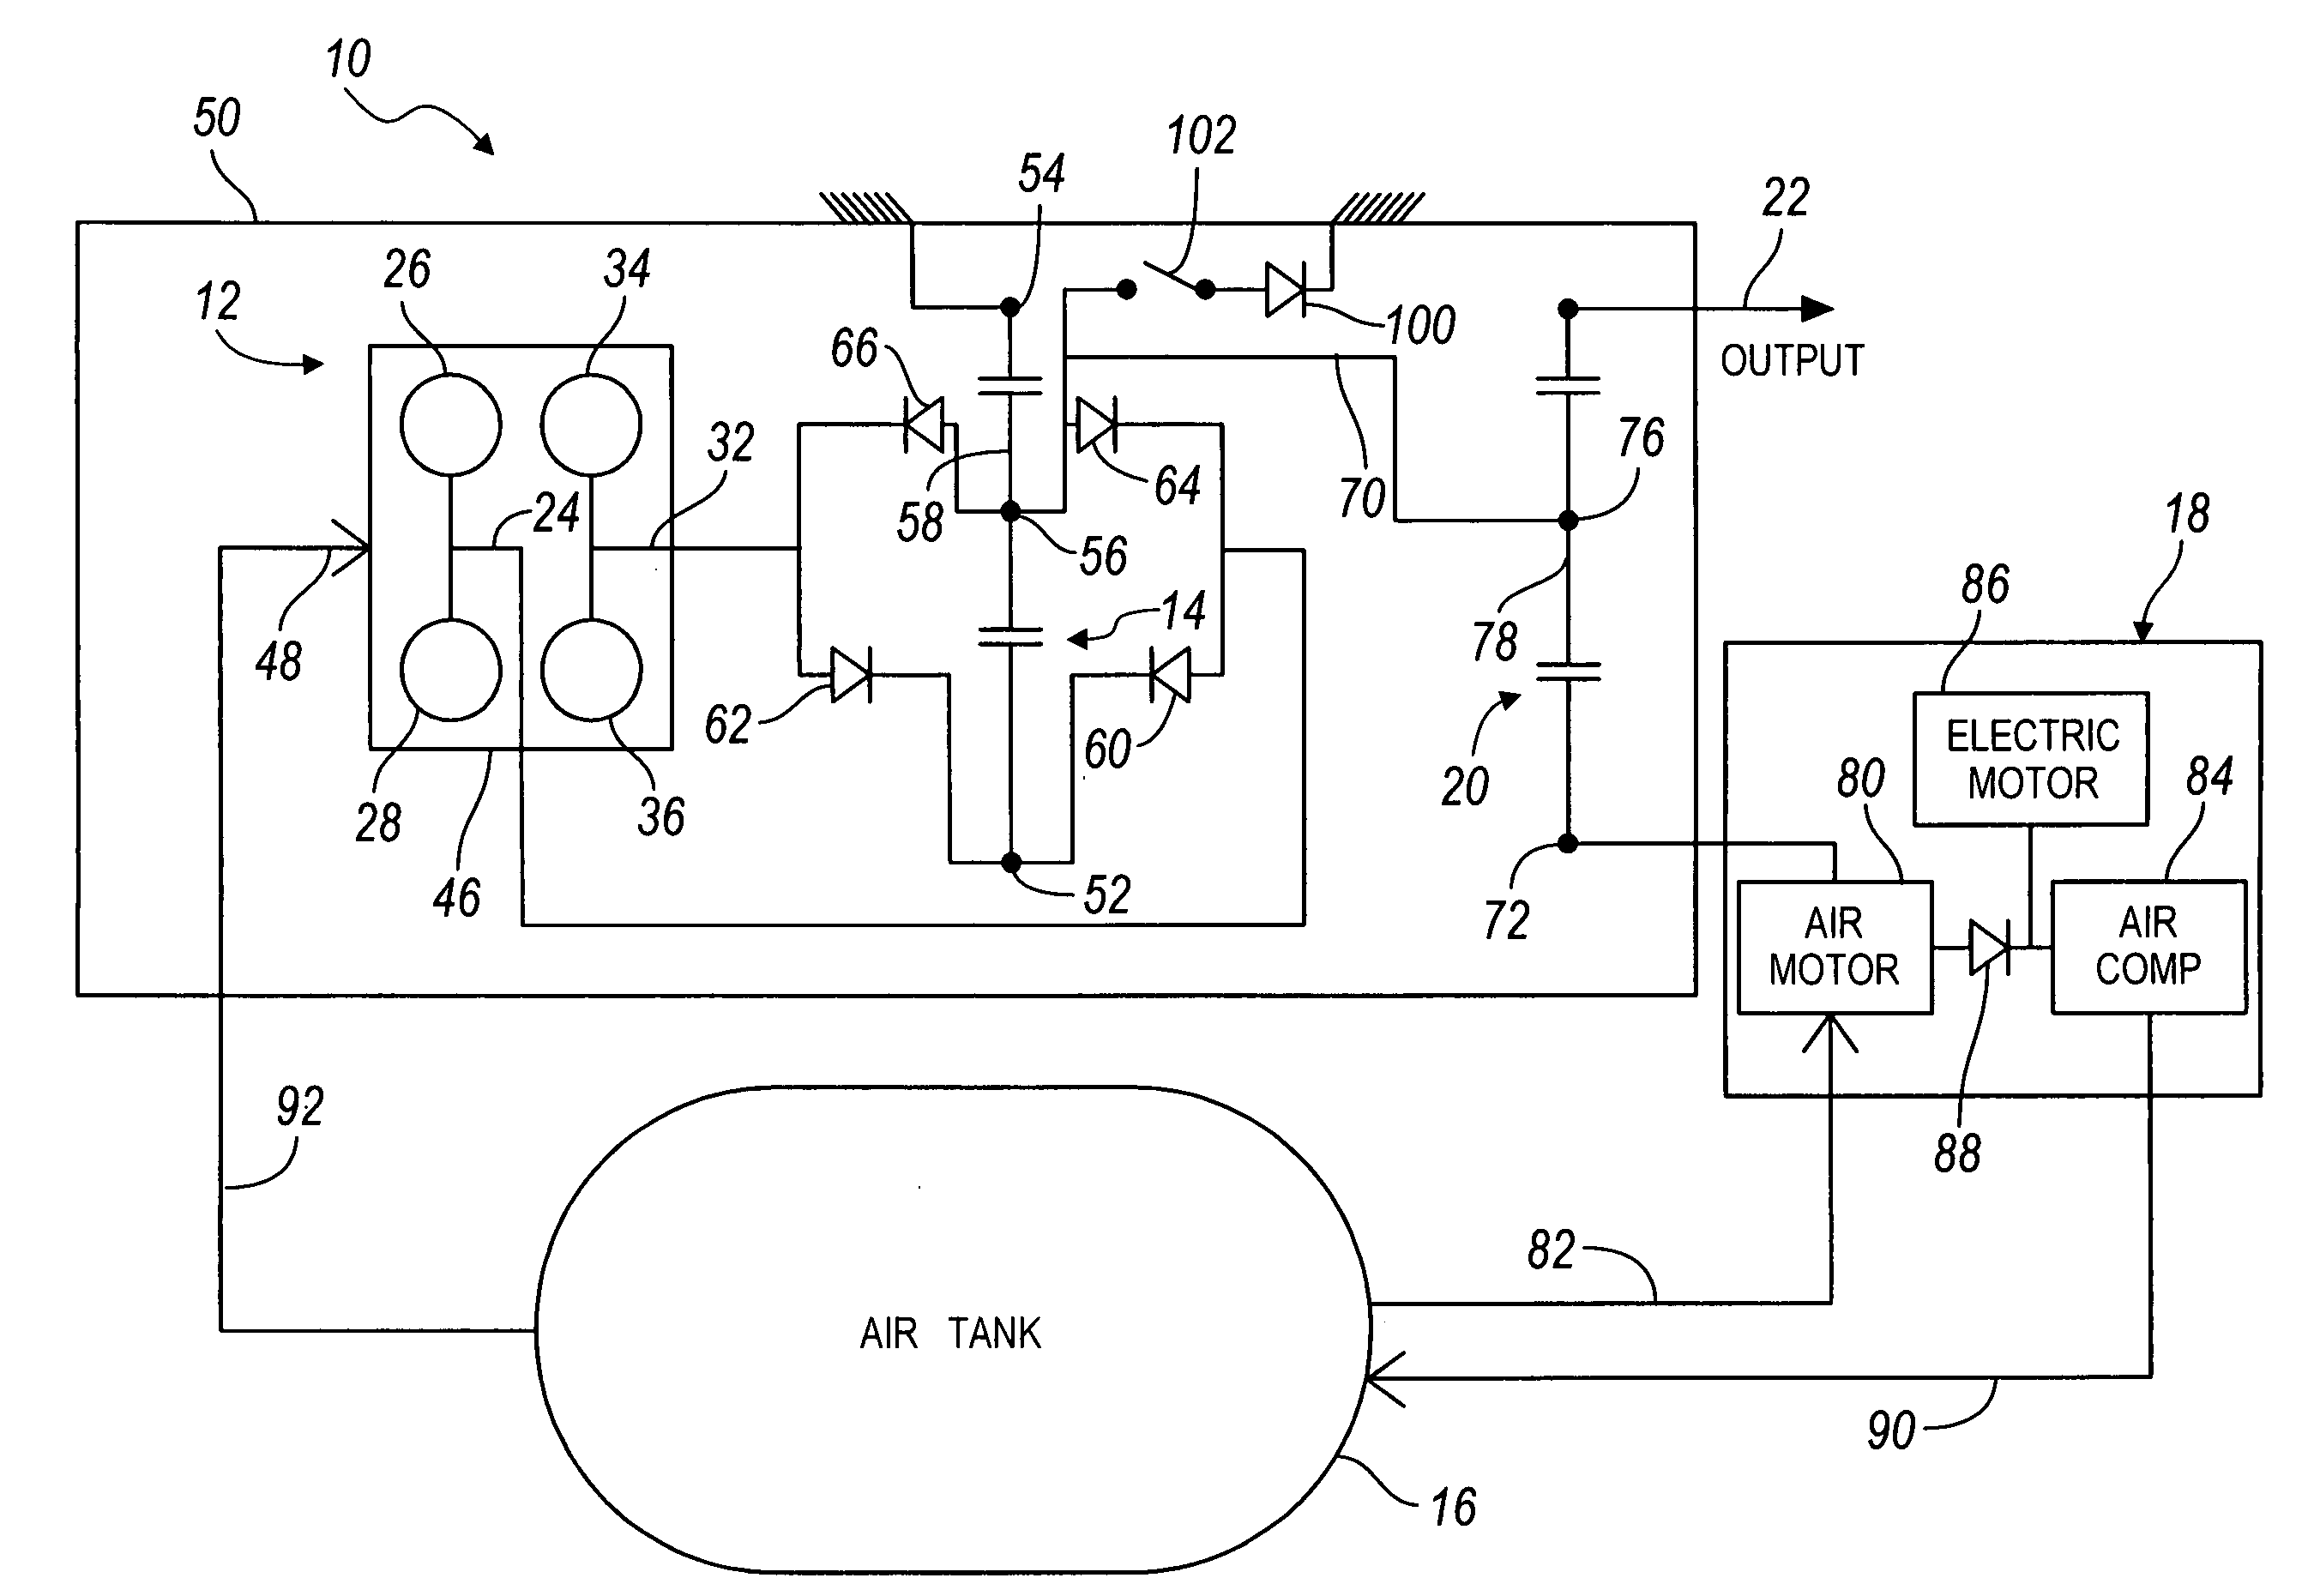 Powertrain including a rotary IC engine and a continuously variable planetary gear unit